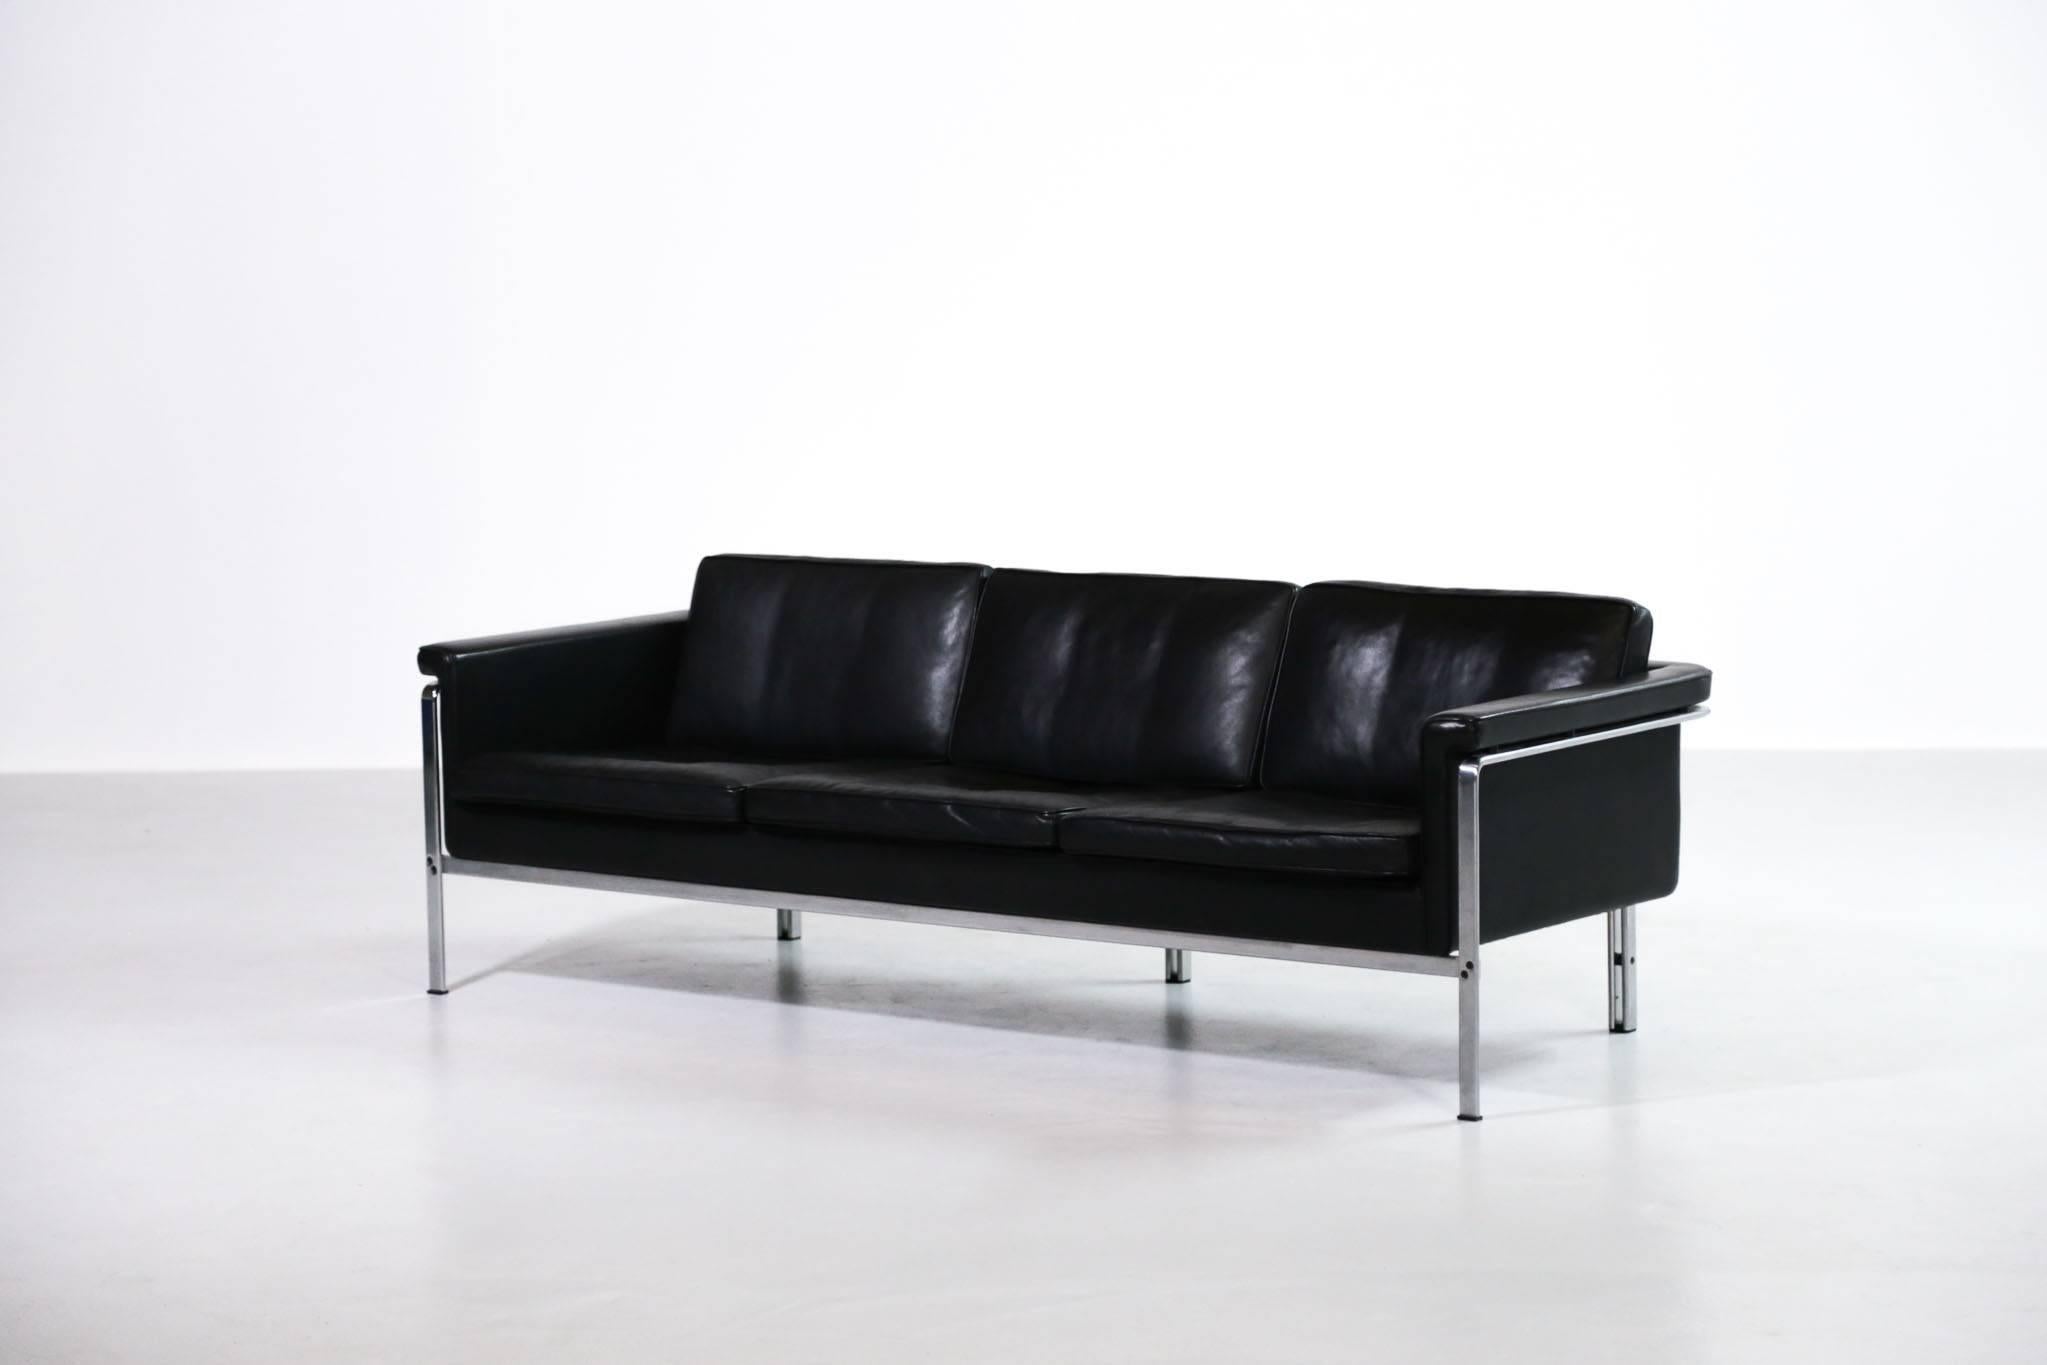 Rare sofa designed by Horst Bruning.
Very nice design made of black leather and steel.
 